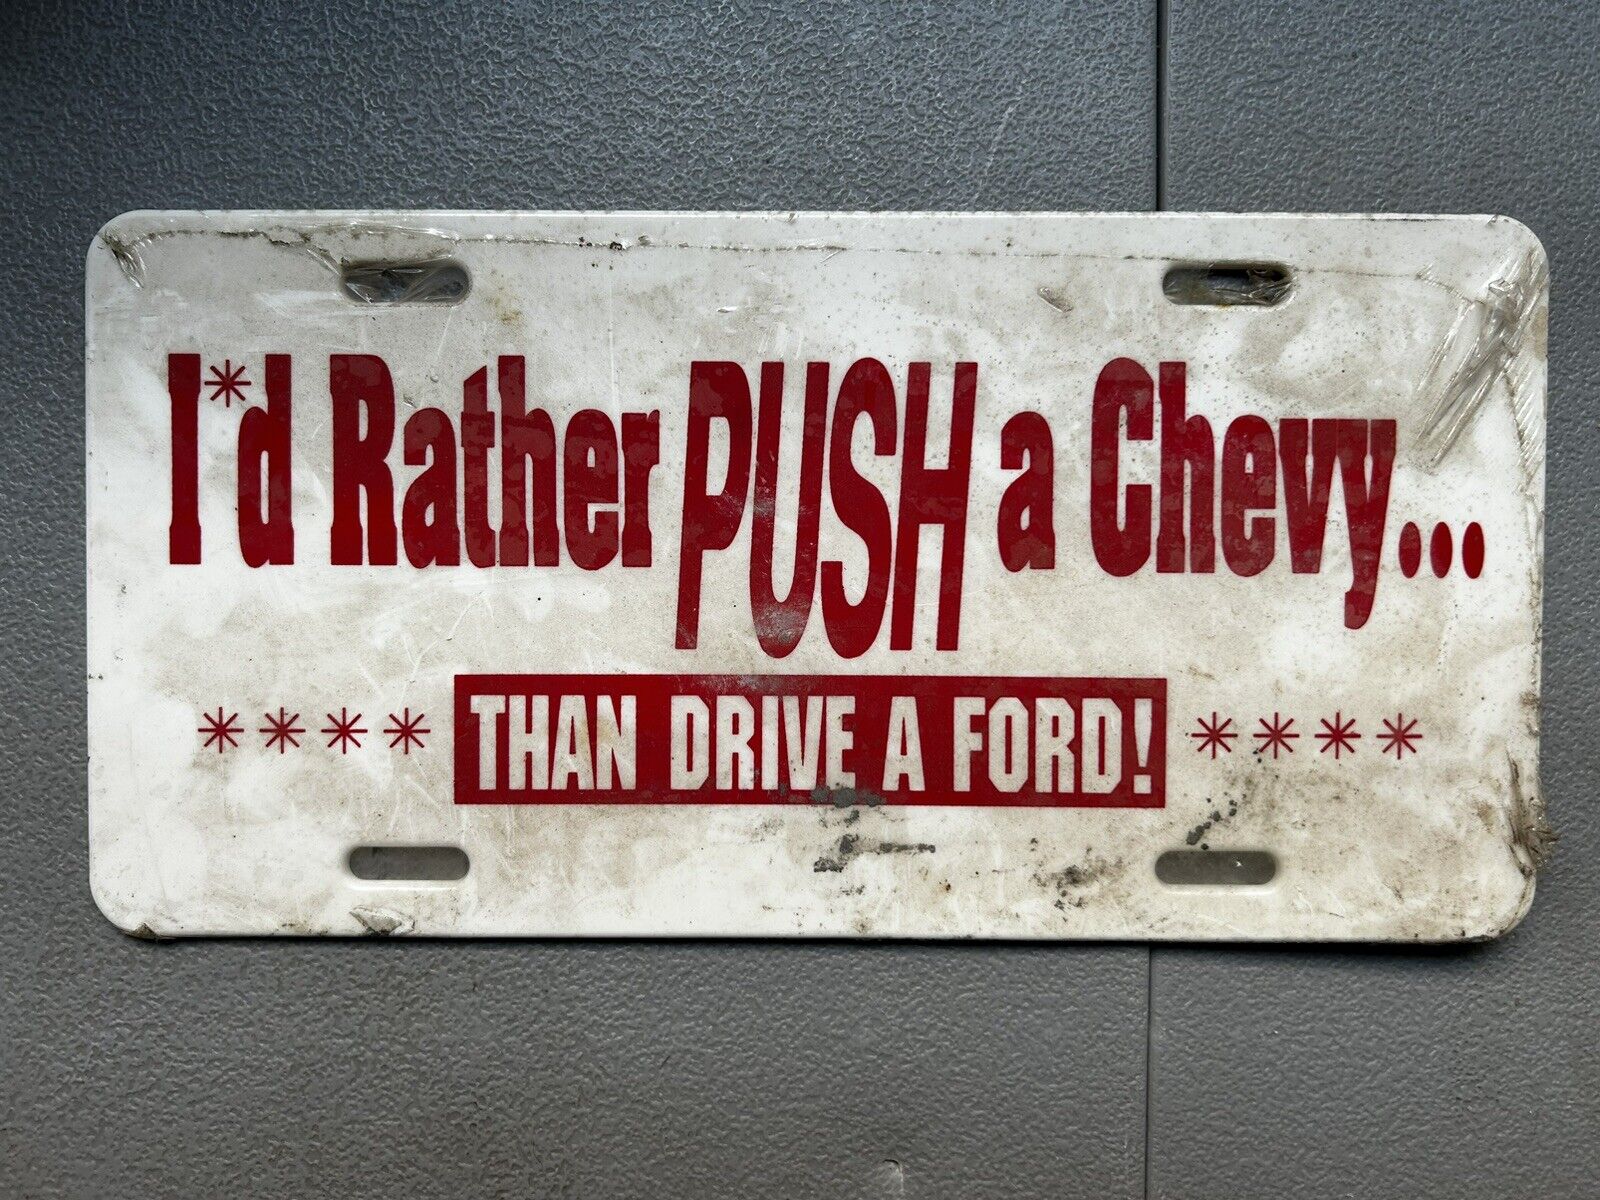 1980s “I’d Rather Push A Chevy Than Drive a Ford”Vintage Plate